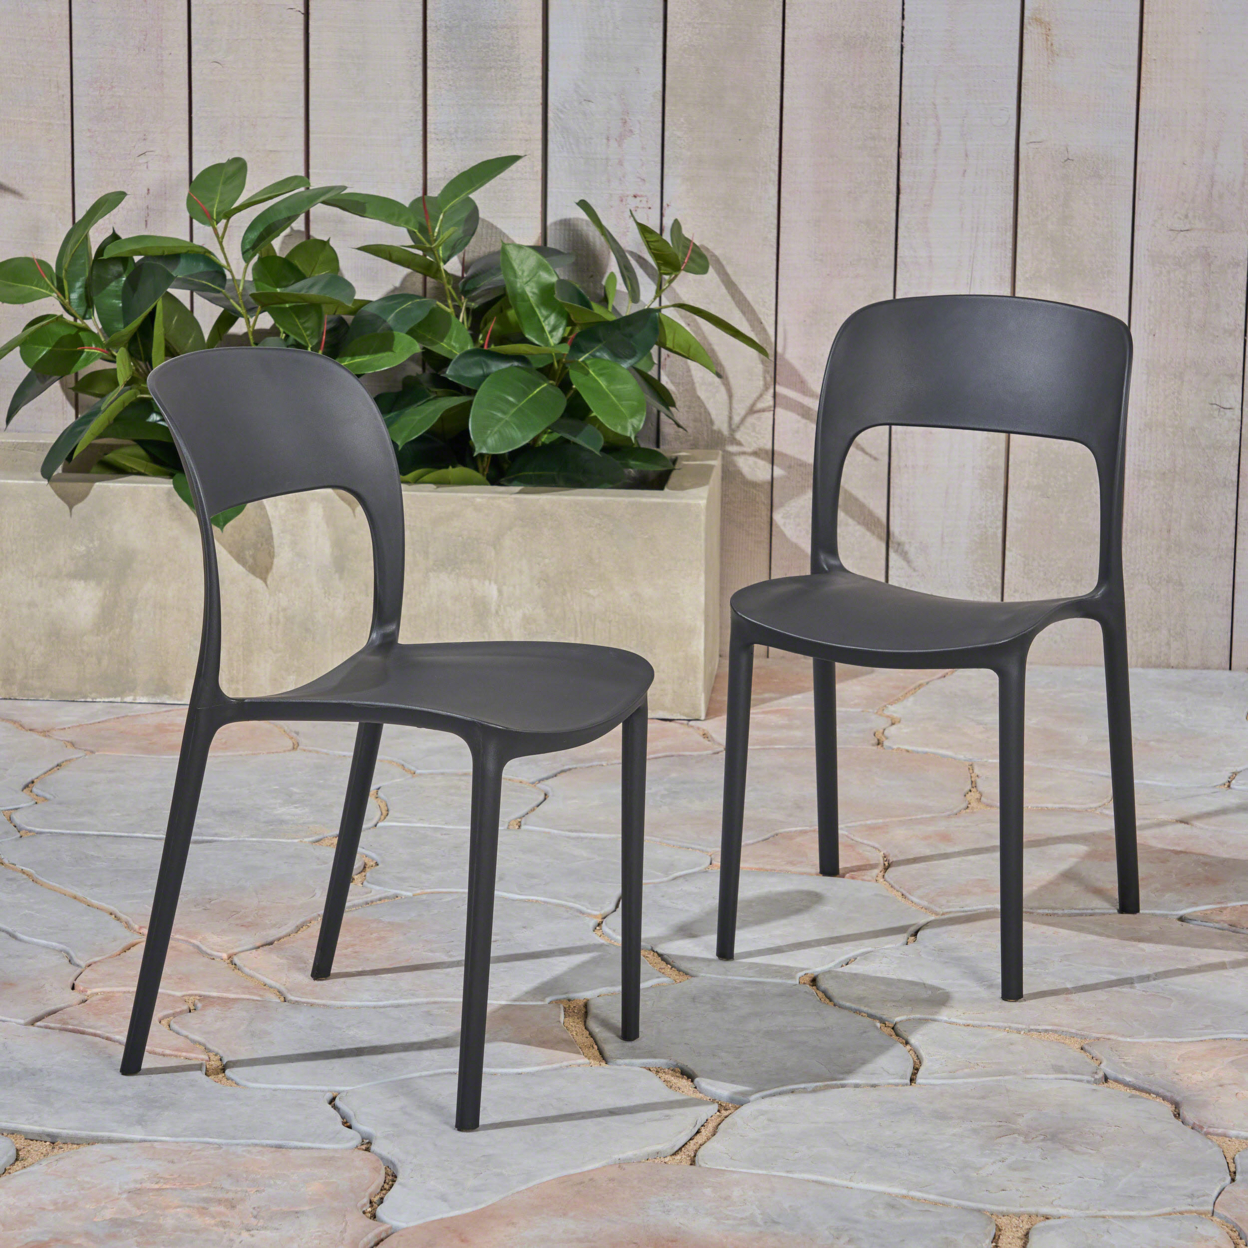 Dean Outdoor Plastic Chairs (Set Of 2) - Black, Set Of 2